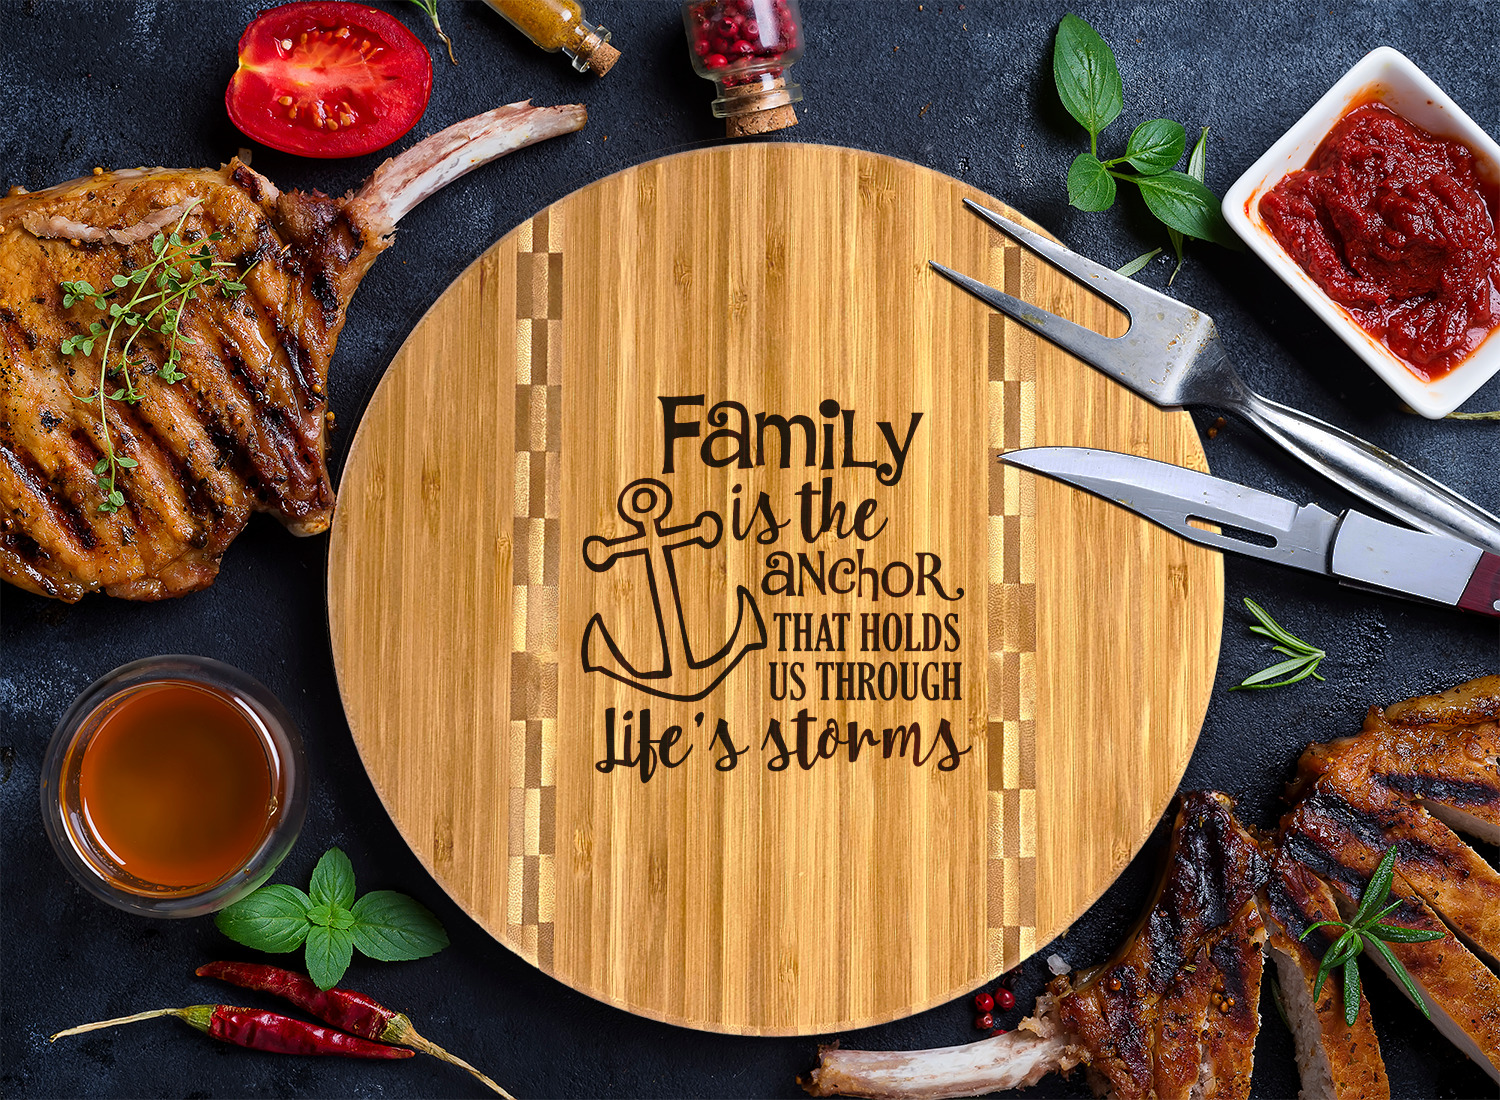 https://www.youcustomizeit.com/common/MAKE/1038129/Family-Quotes-and-Sayings-Bamboo-Cutting-Boards-LIFESTYLE.jpg?lm=1658265586